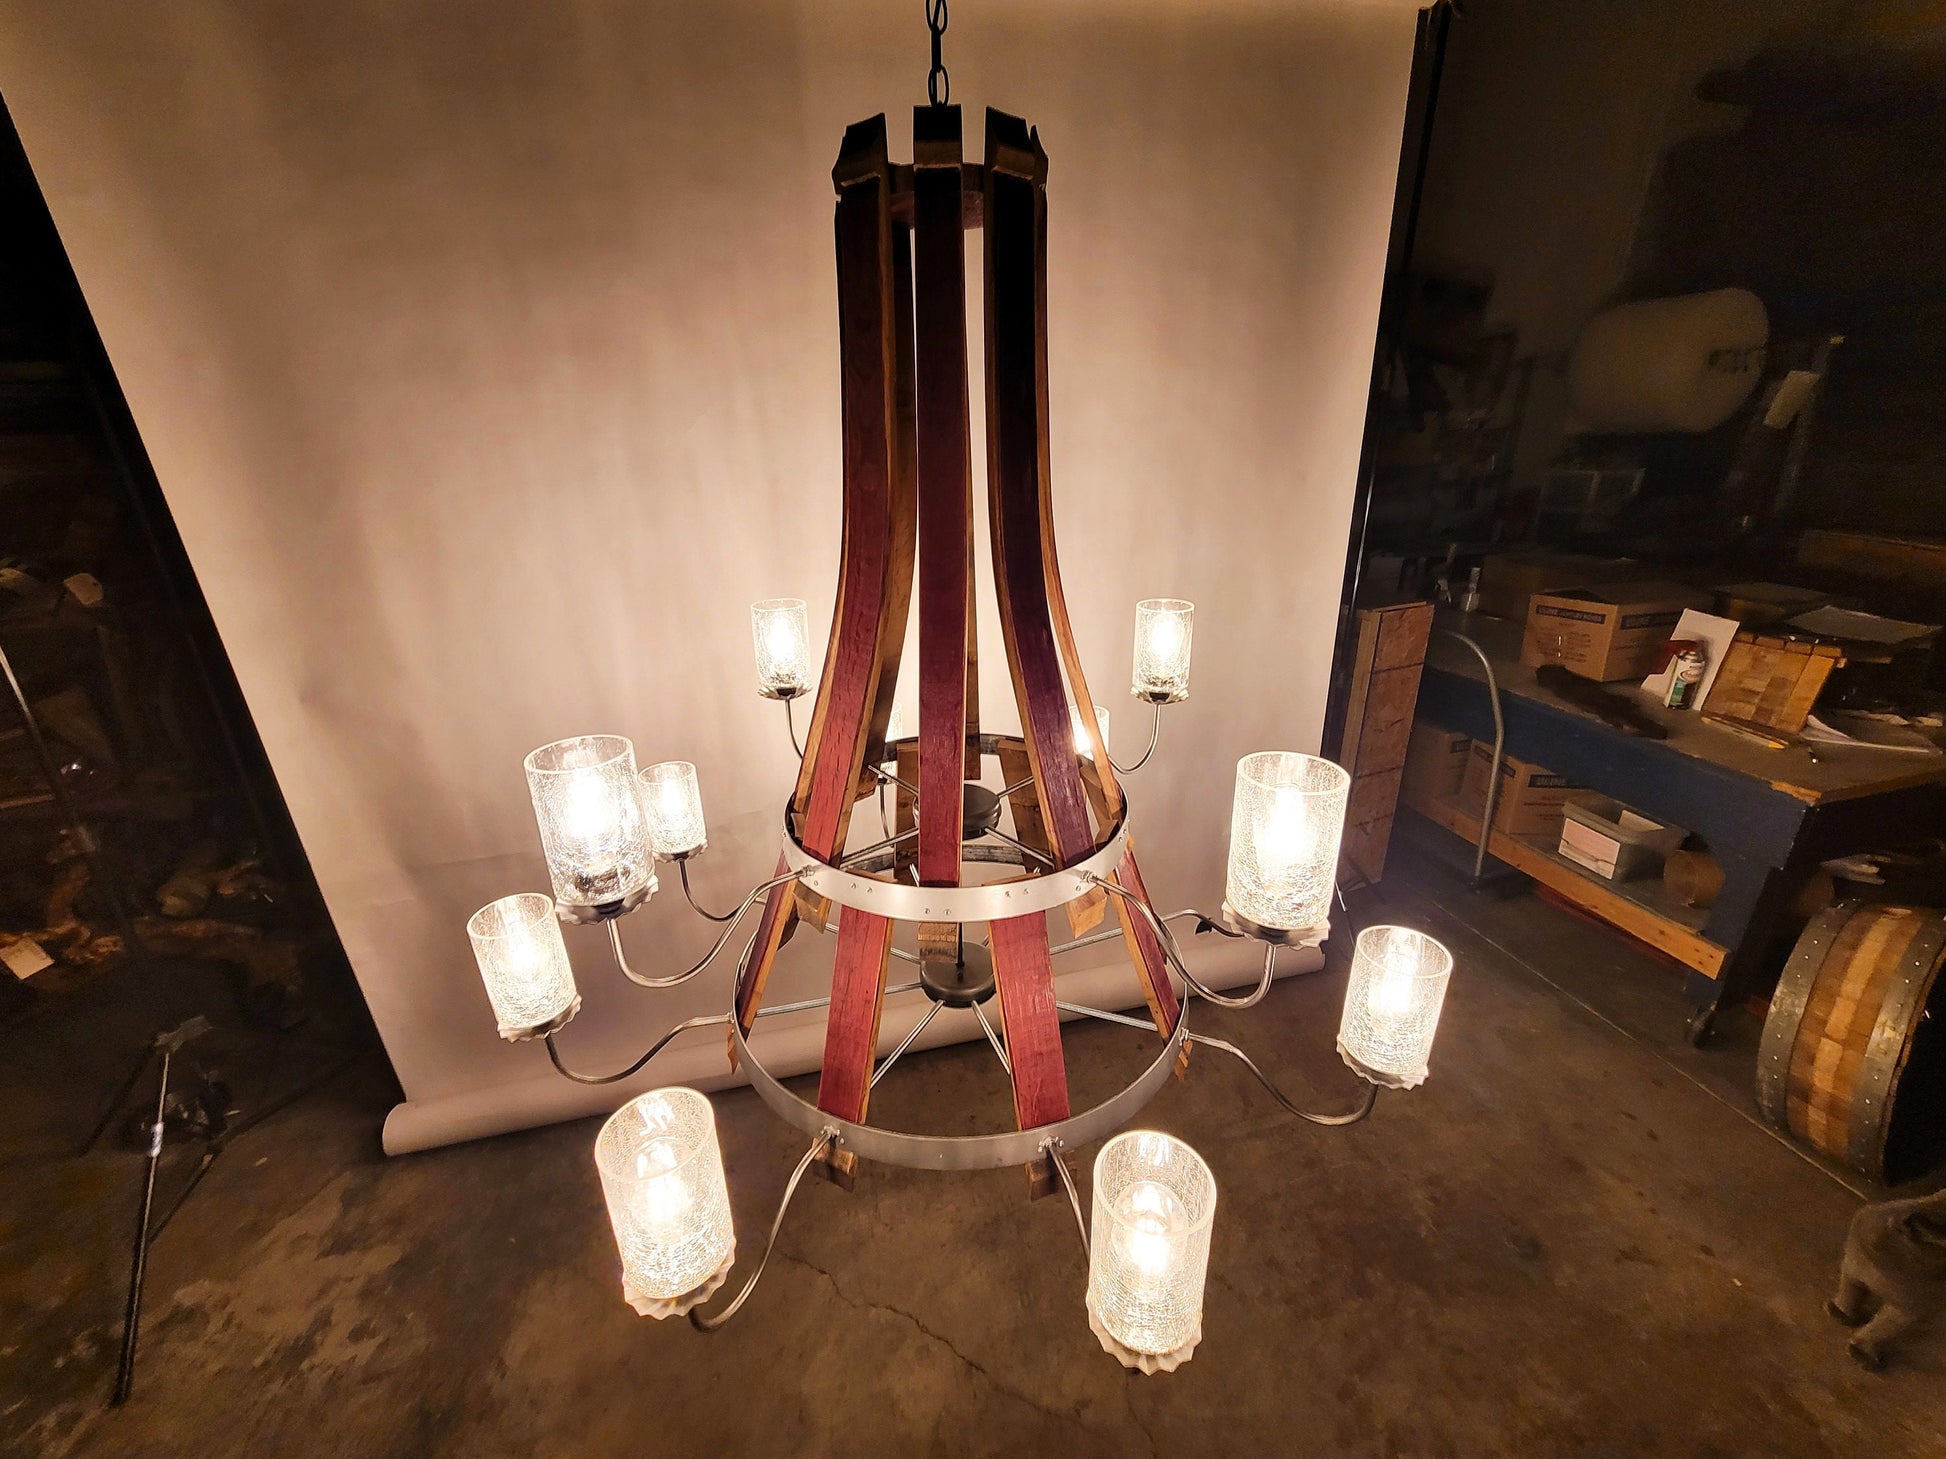 Wine Barrel Basket Chandelier - PAPALUA - Made from retired California wine barrels 100% Recycled!